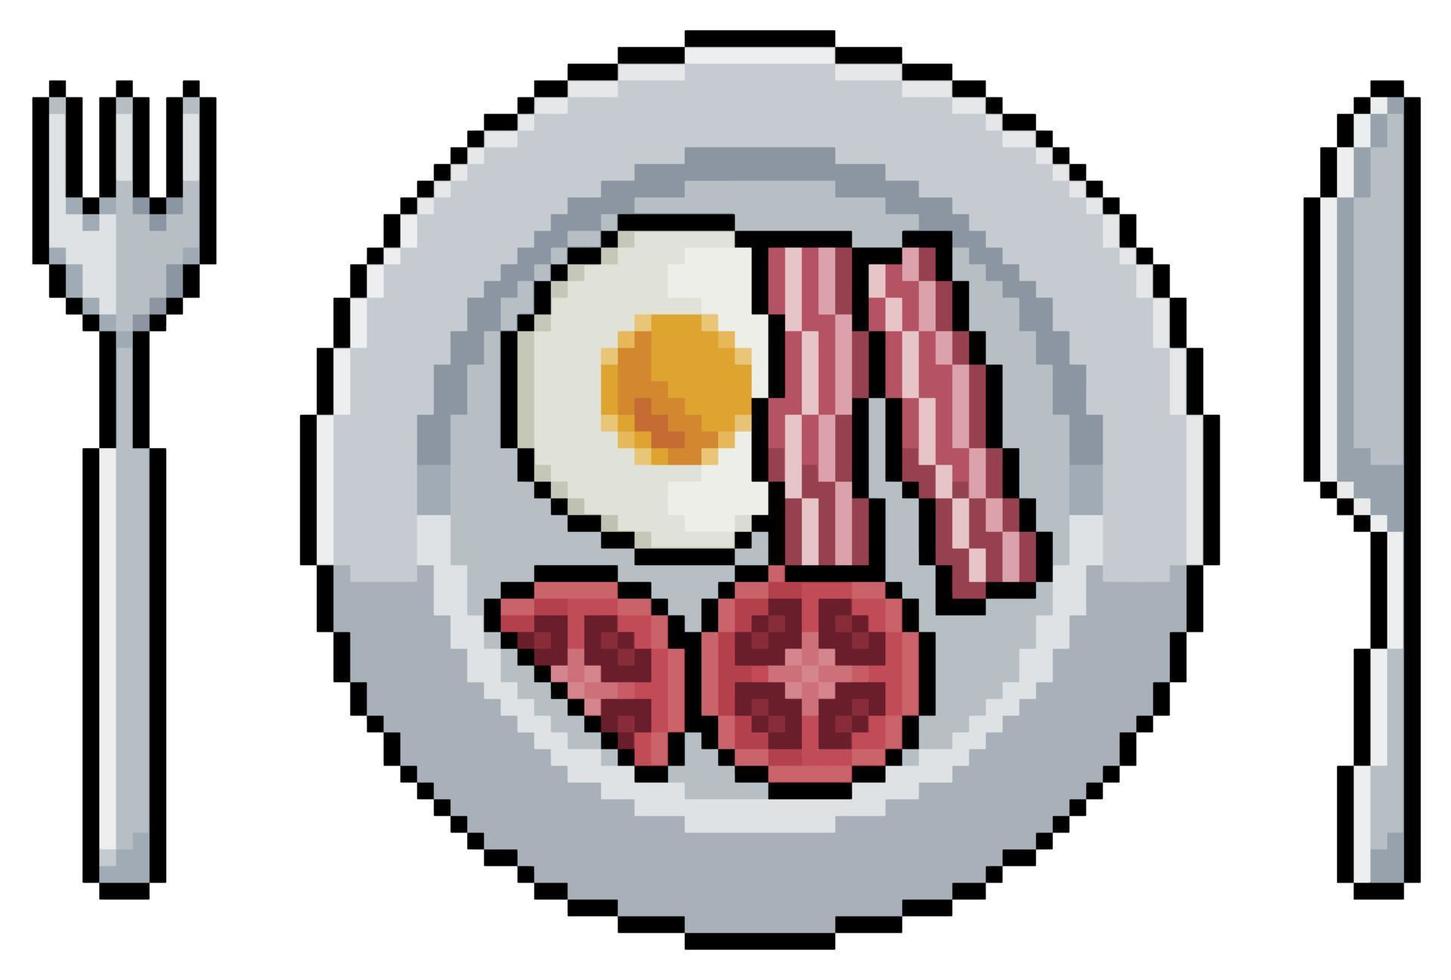 Pixel art plate with eggs, bacon, tomatoes and cutlery vector icon for 8bit game on white background